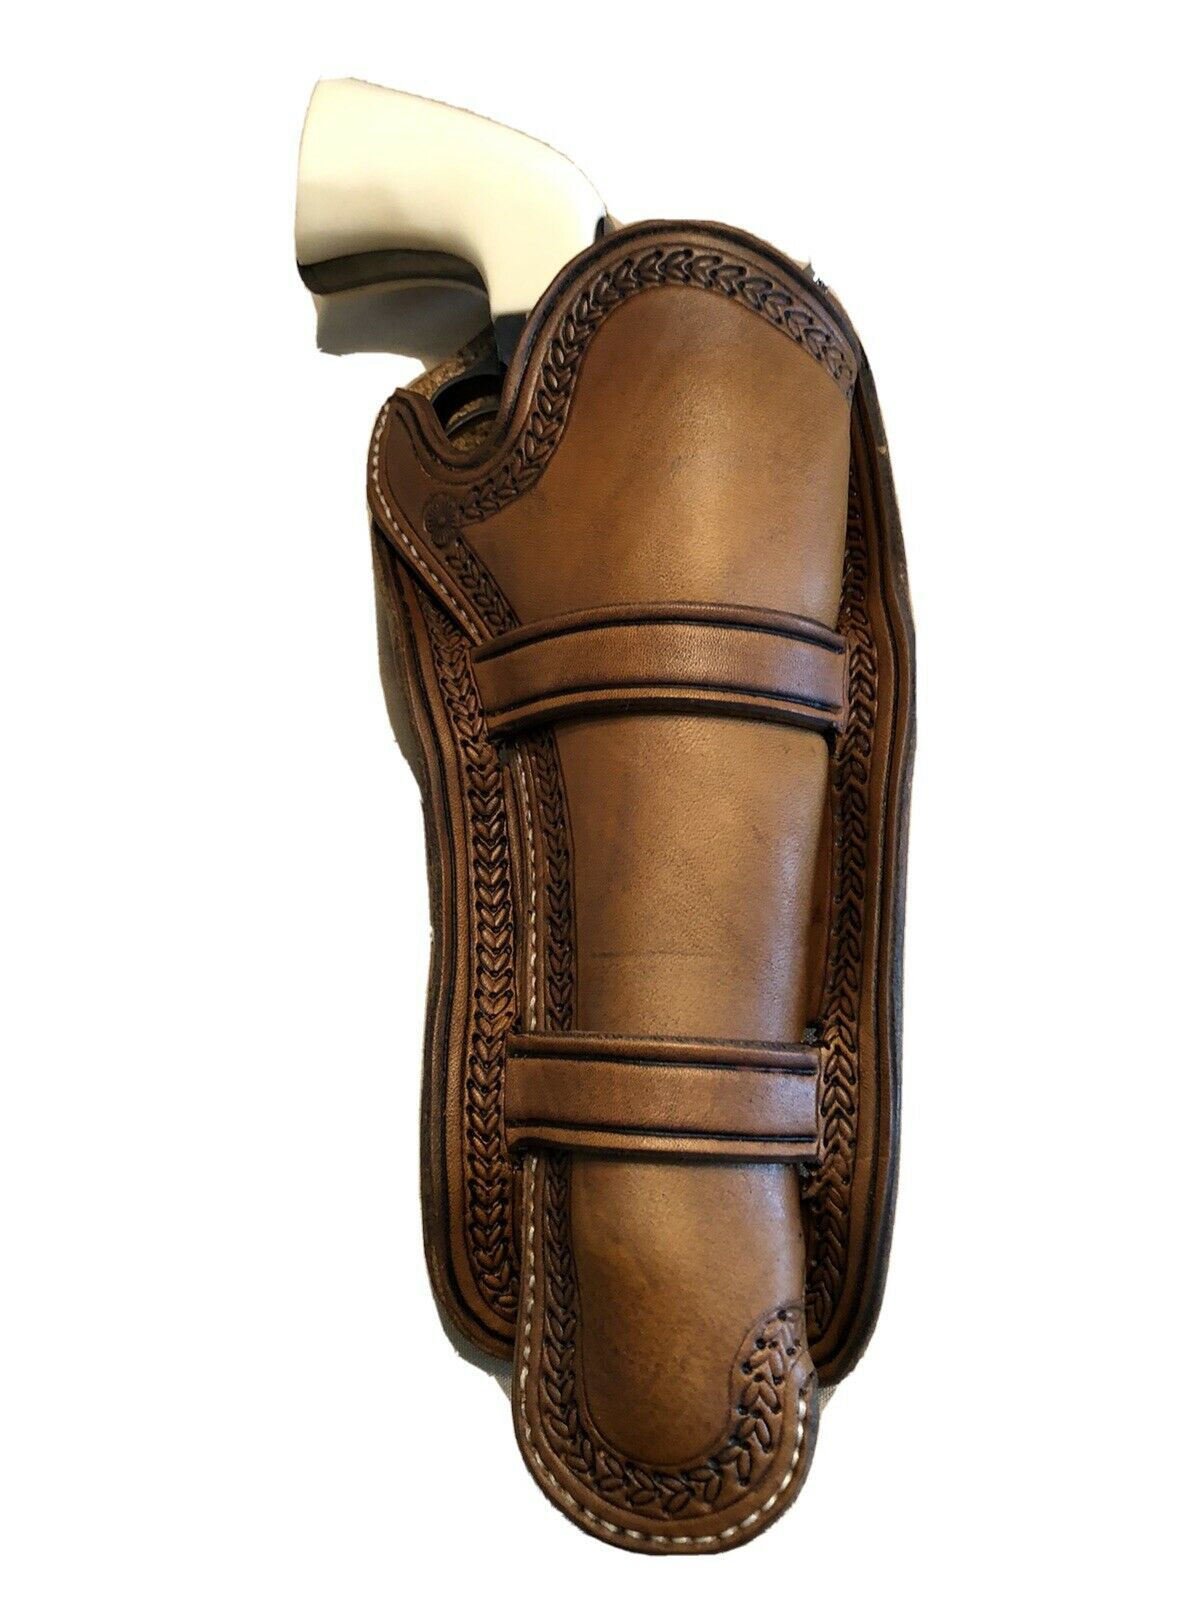 Mexican Loop Billy The Kid Replica Holster.